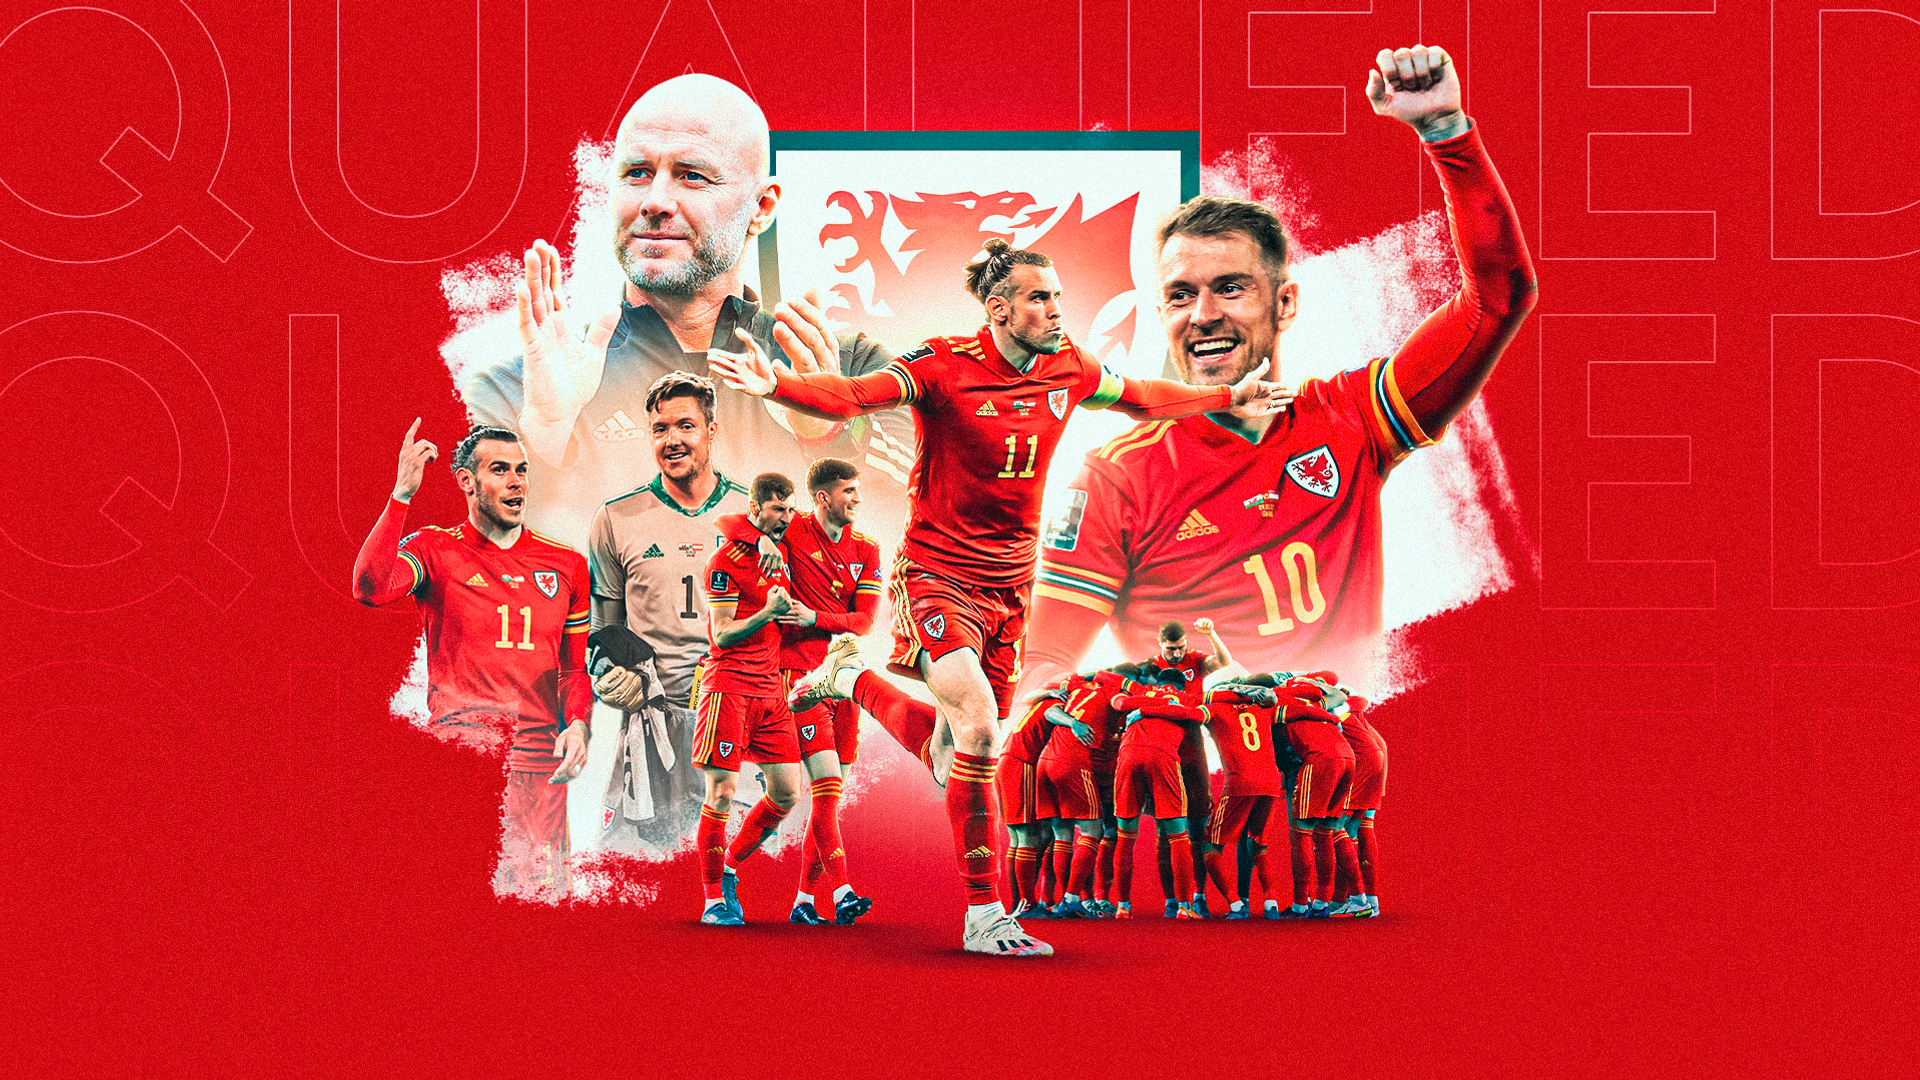 Wales beat Ukraine to qualify for World Cup